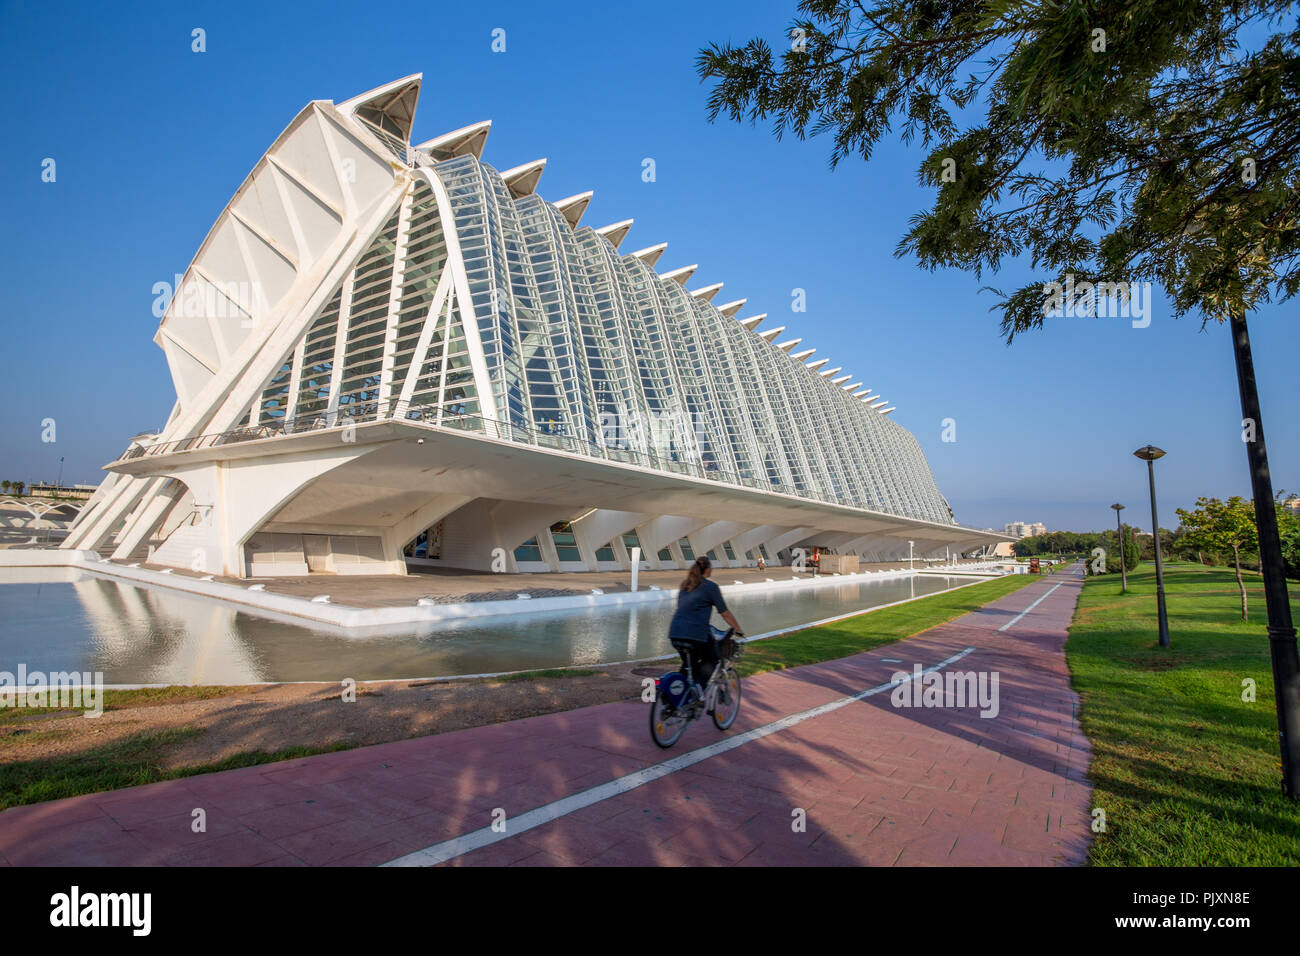 The science museum in the City of Arts and Sciences in Valencia, Spain Stock Photo